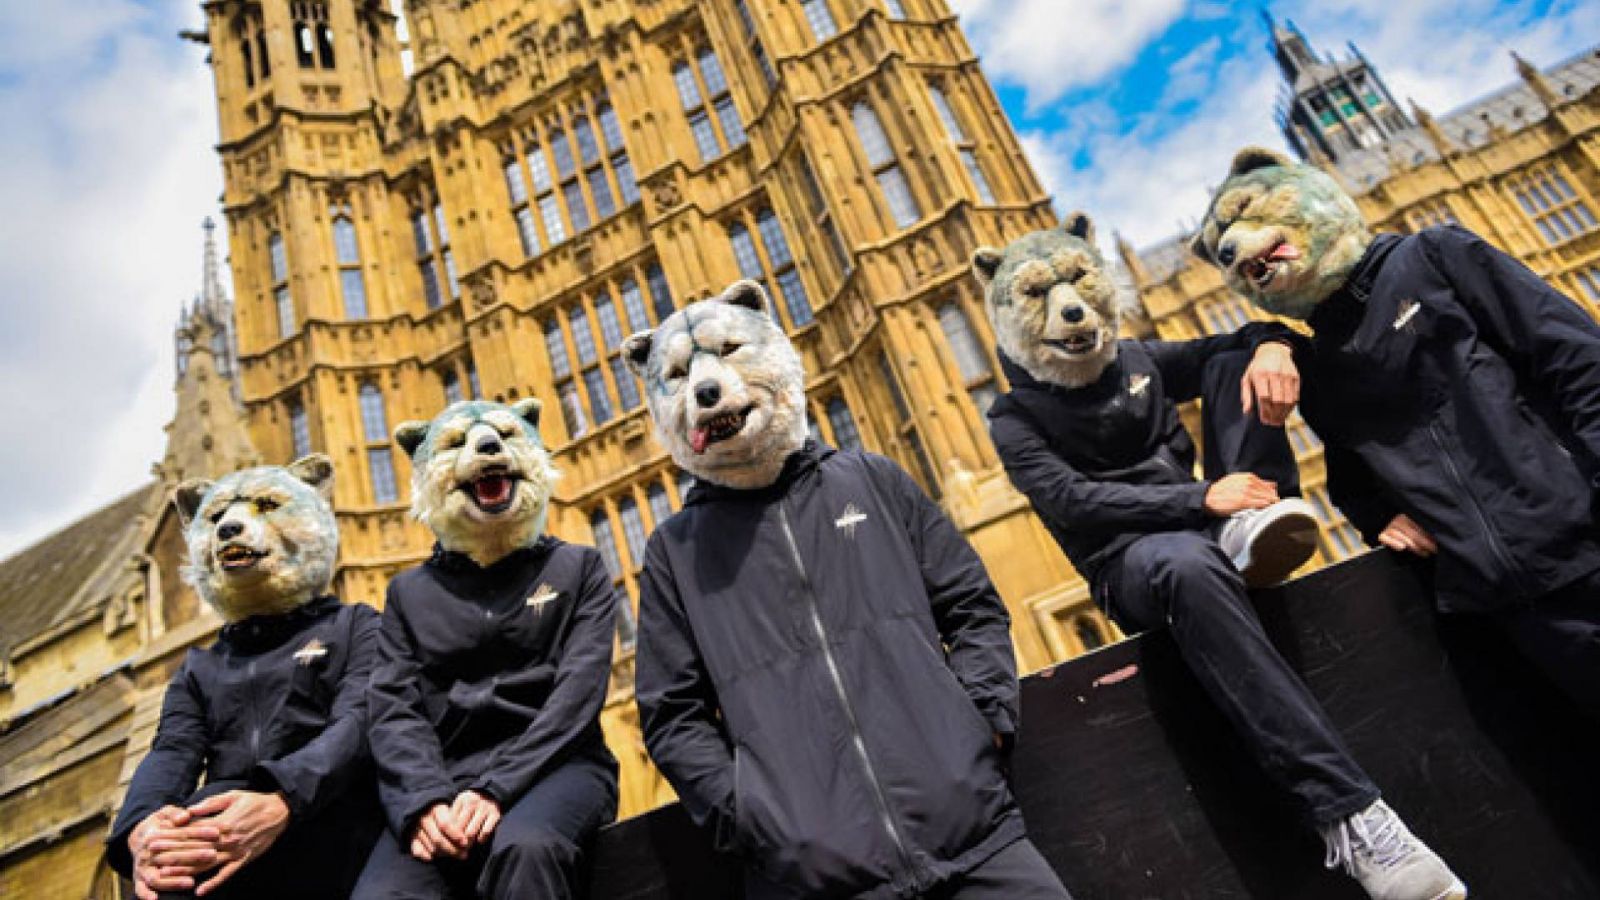 MAN WITH A MISSION Tuska Open Airiin © MAN WITH A MISSION. All rights reserved.